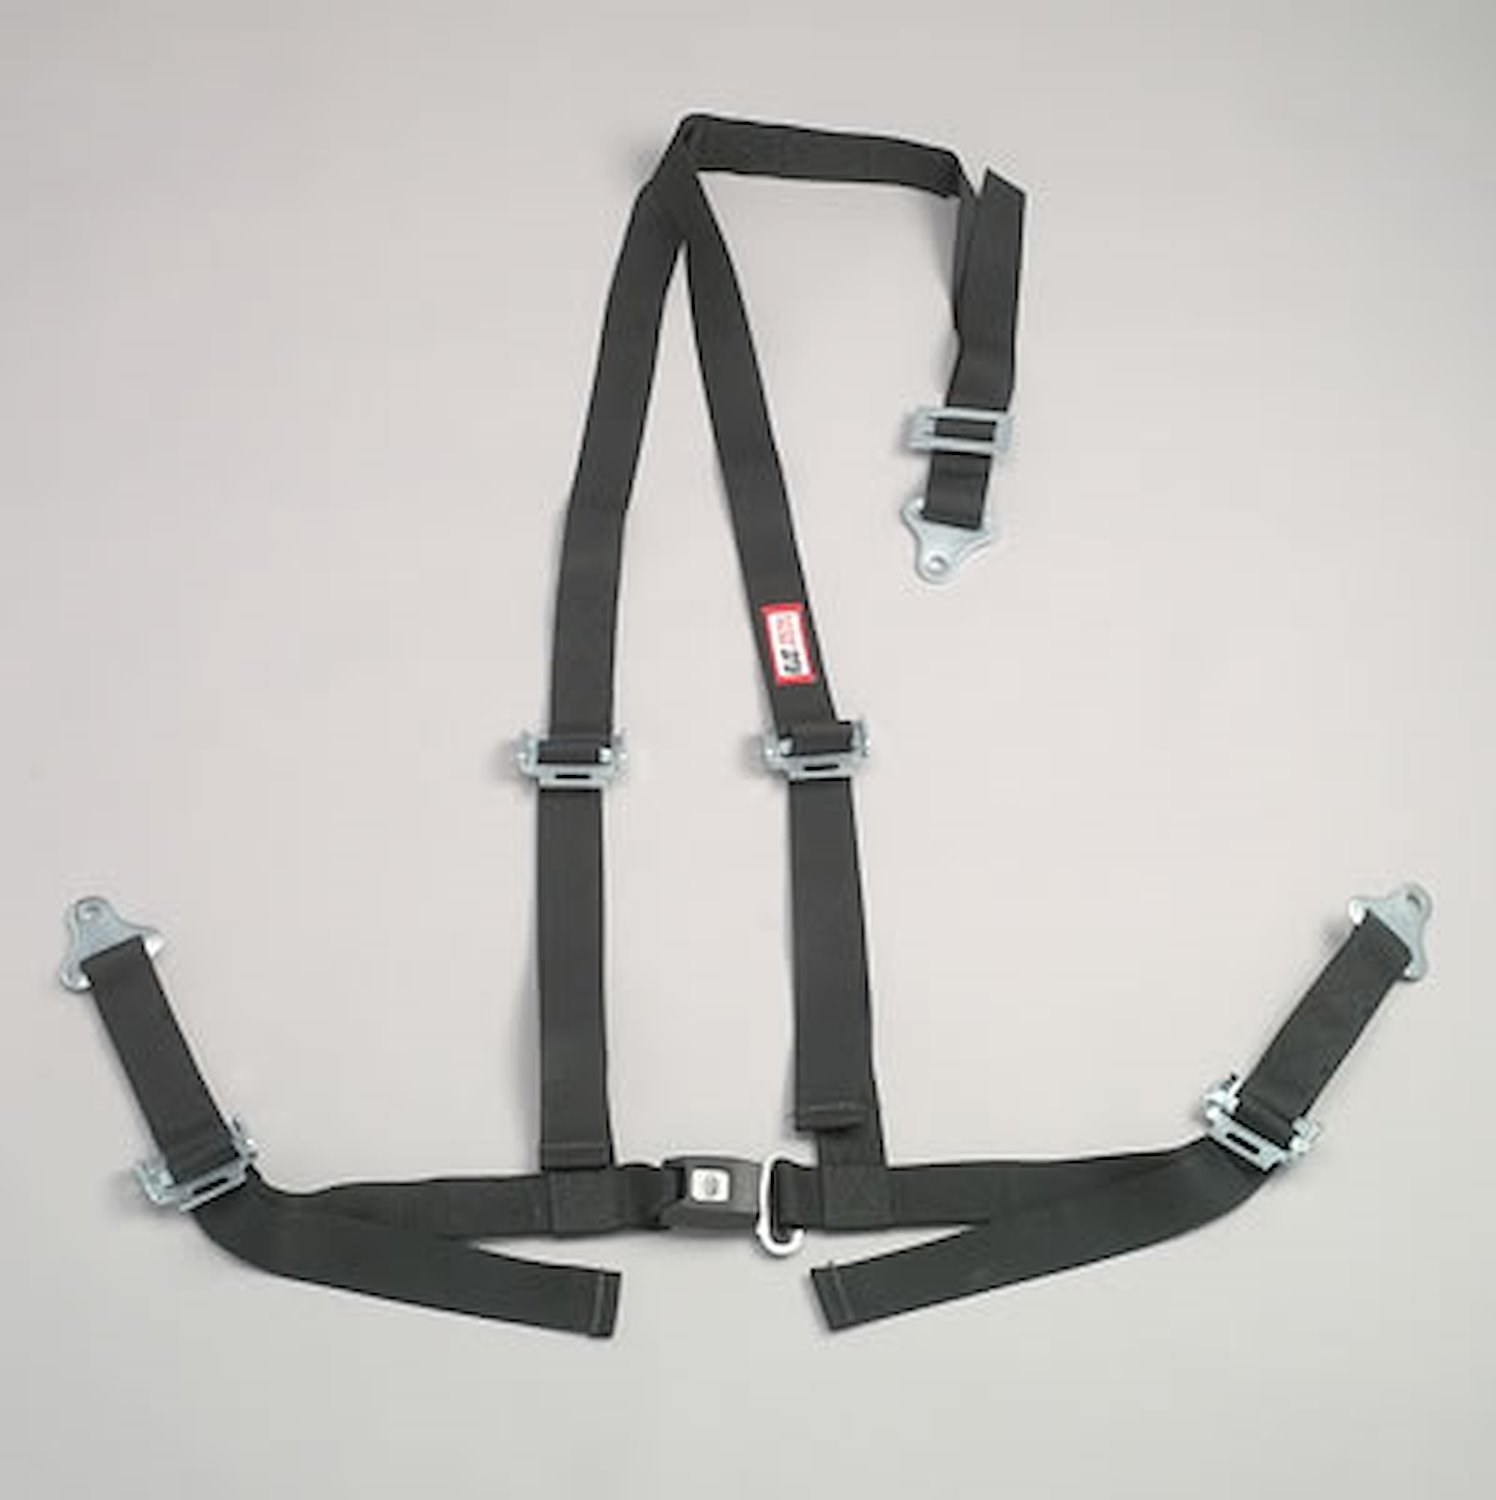 NON-SFI B&T HARNESS 2 PULL UP Lap Belt 2 S. H. Y FLOOR Mount ALL WRAP ENDS w/STERNUM STRAP RED